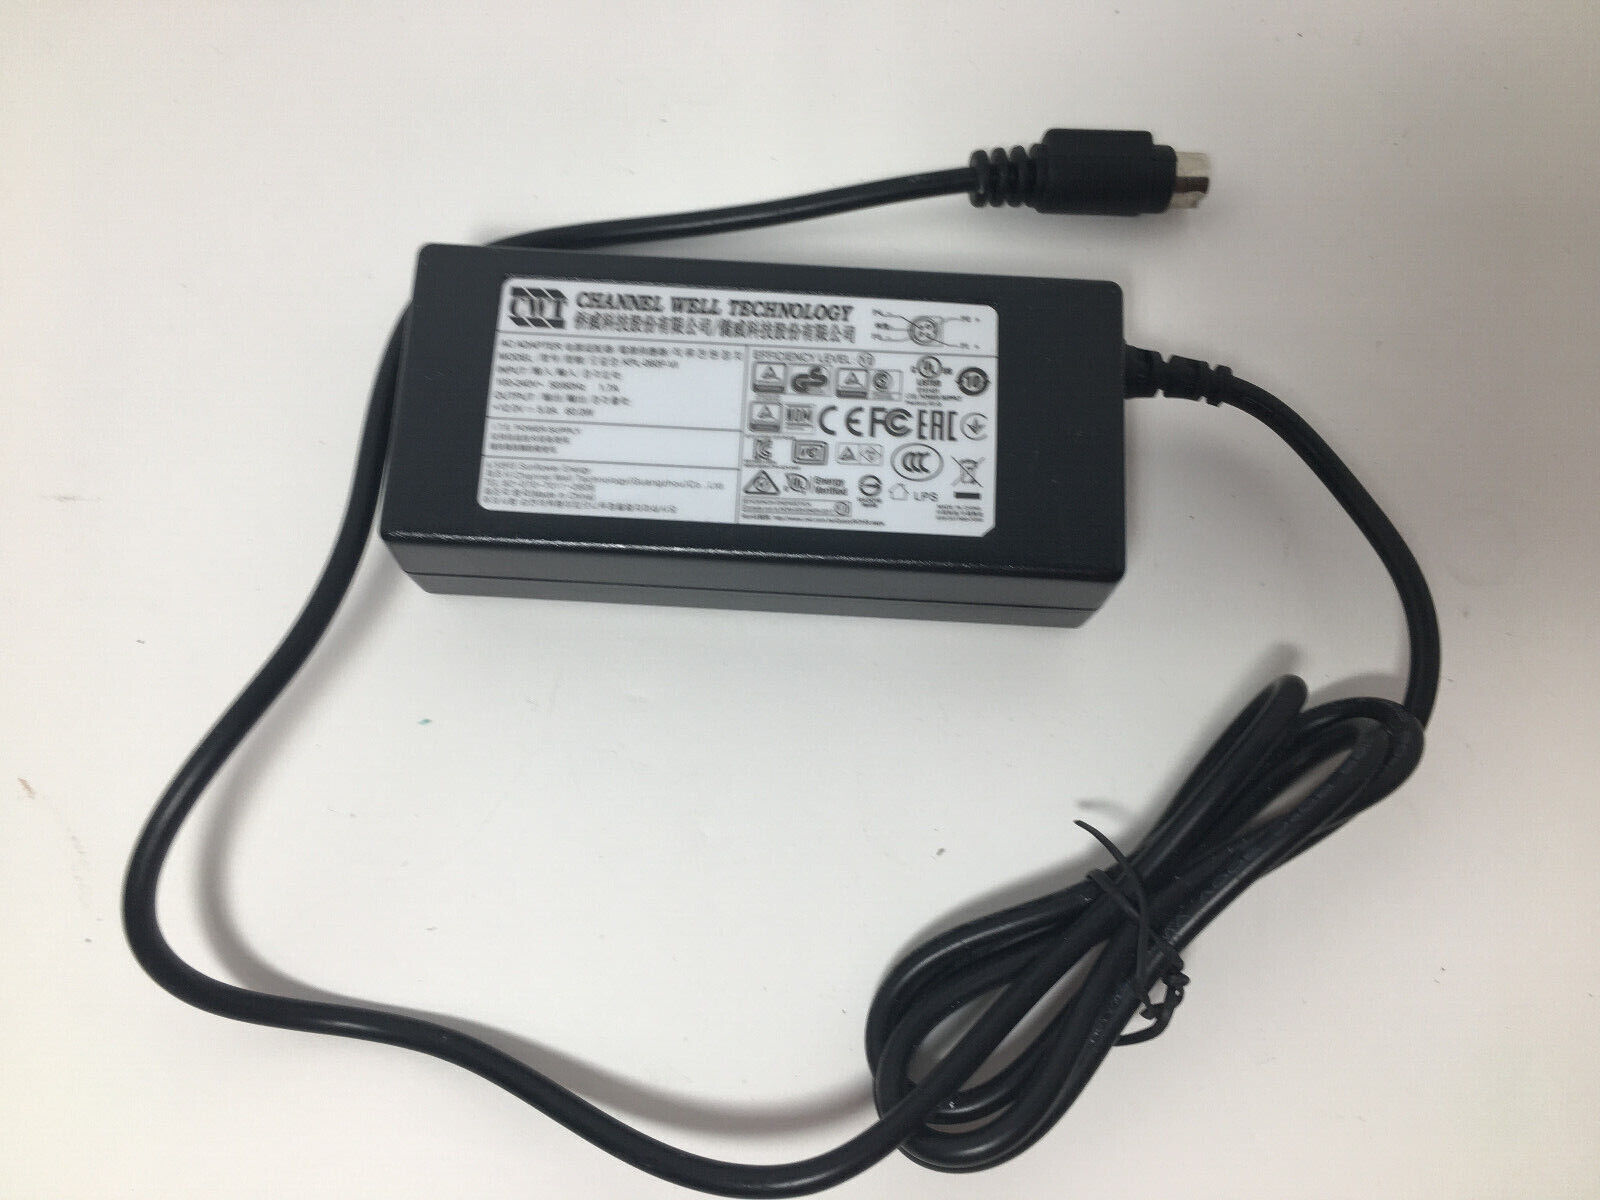 Genuine CWT Channel Well Technology AC Adapter KPL-060F-VI 12V 5A 60W 4-Pin NEW Compatible Brand Universal Type Power A - Click Image to Close